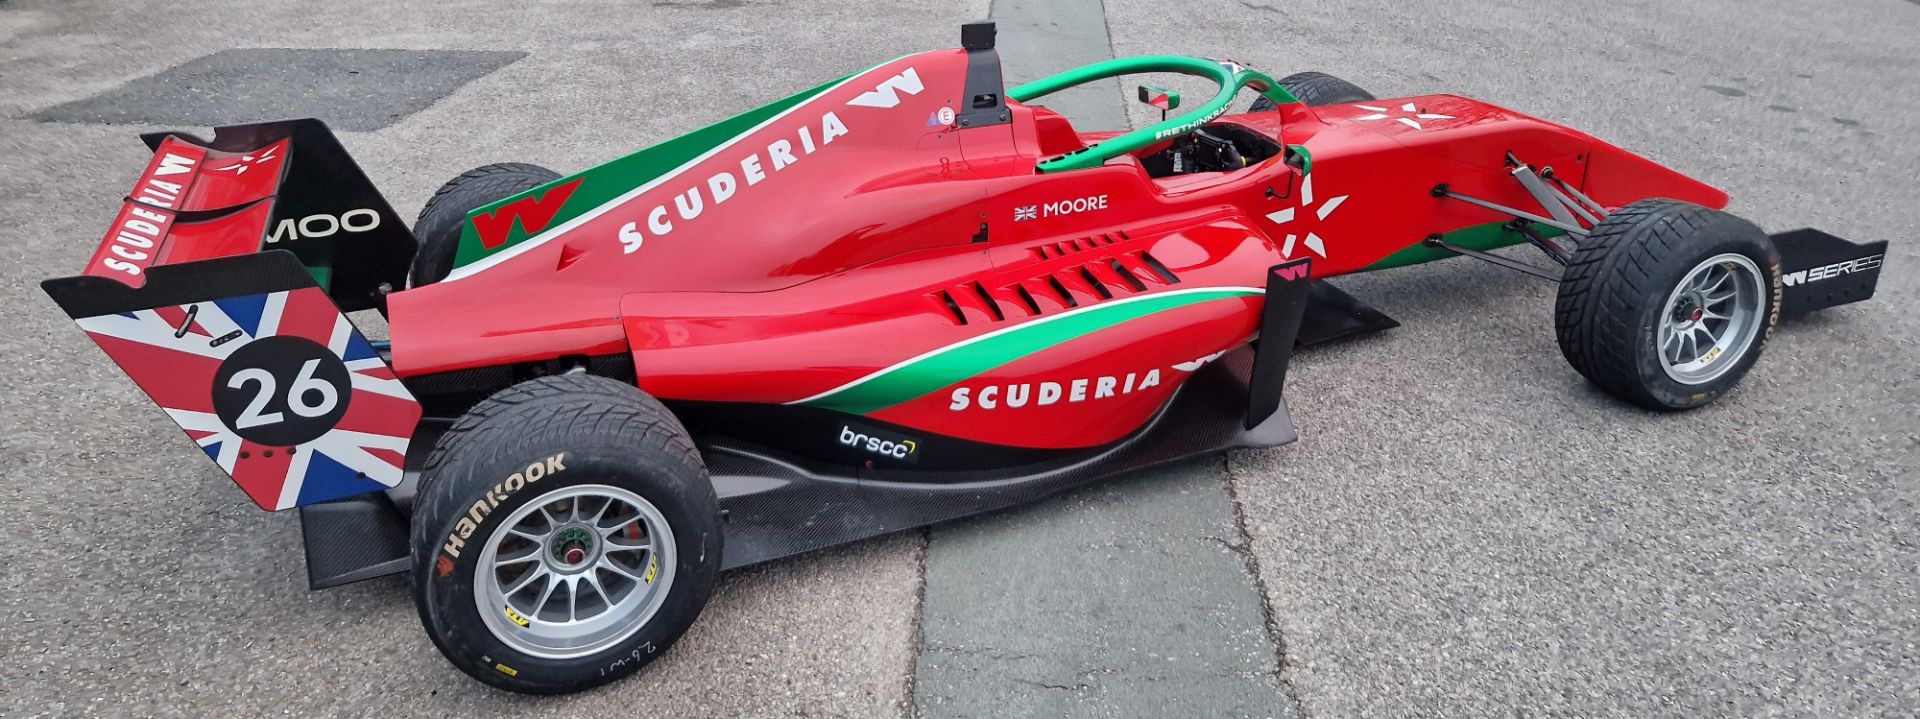 One TATUUS F3 T-318 Alfa Romeo Race Car Chassis No. 038 (2019) Finished in SCUDERIA Livery as Driven - Bild 2 aus 10